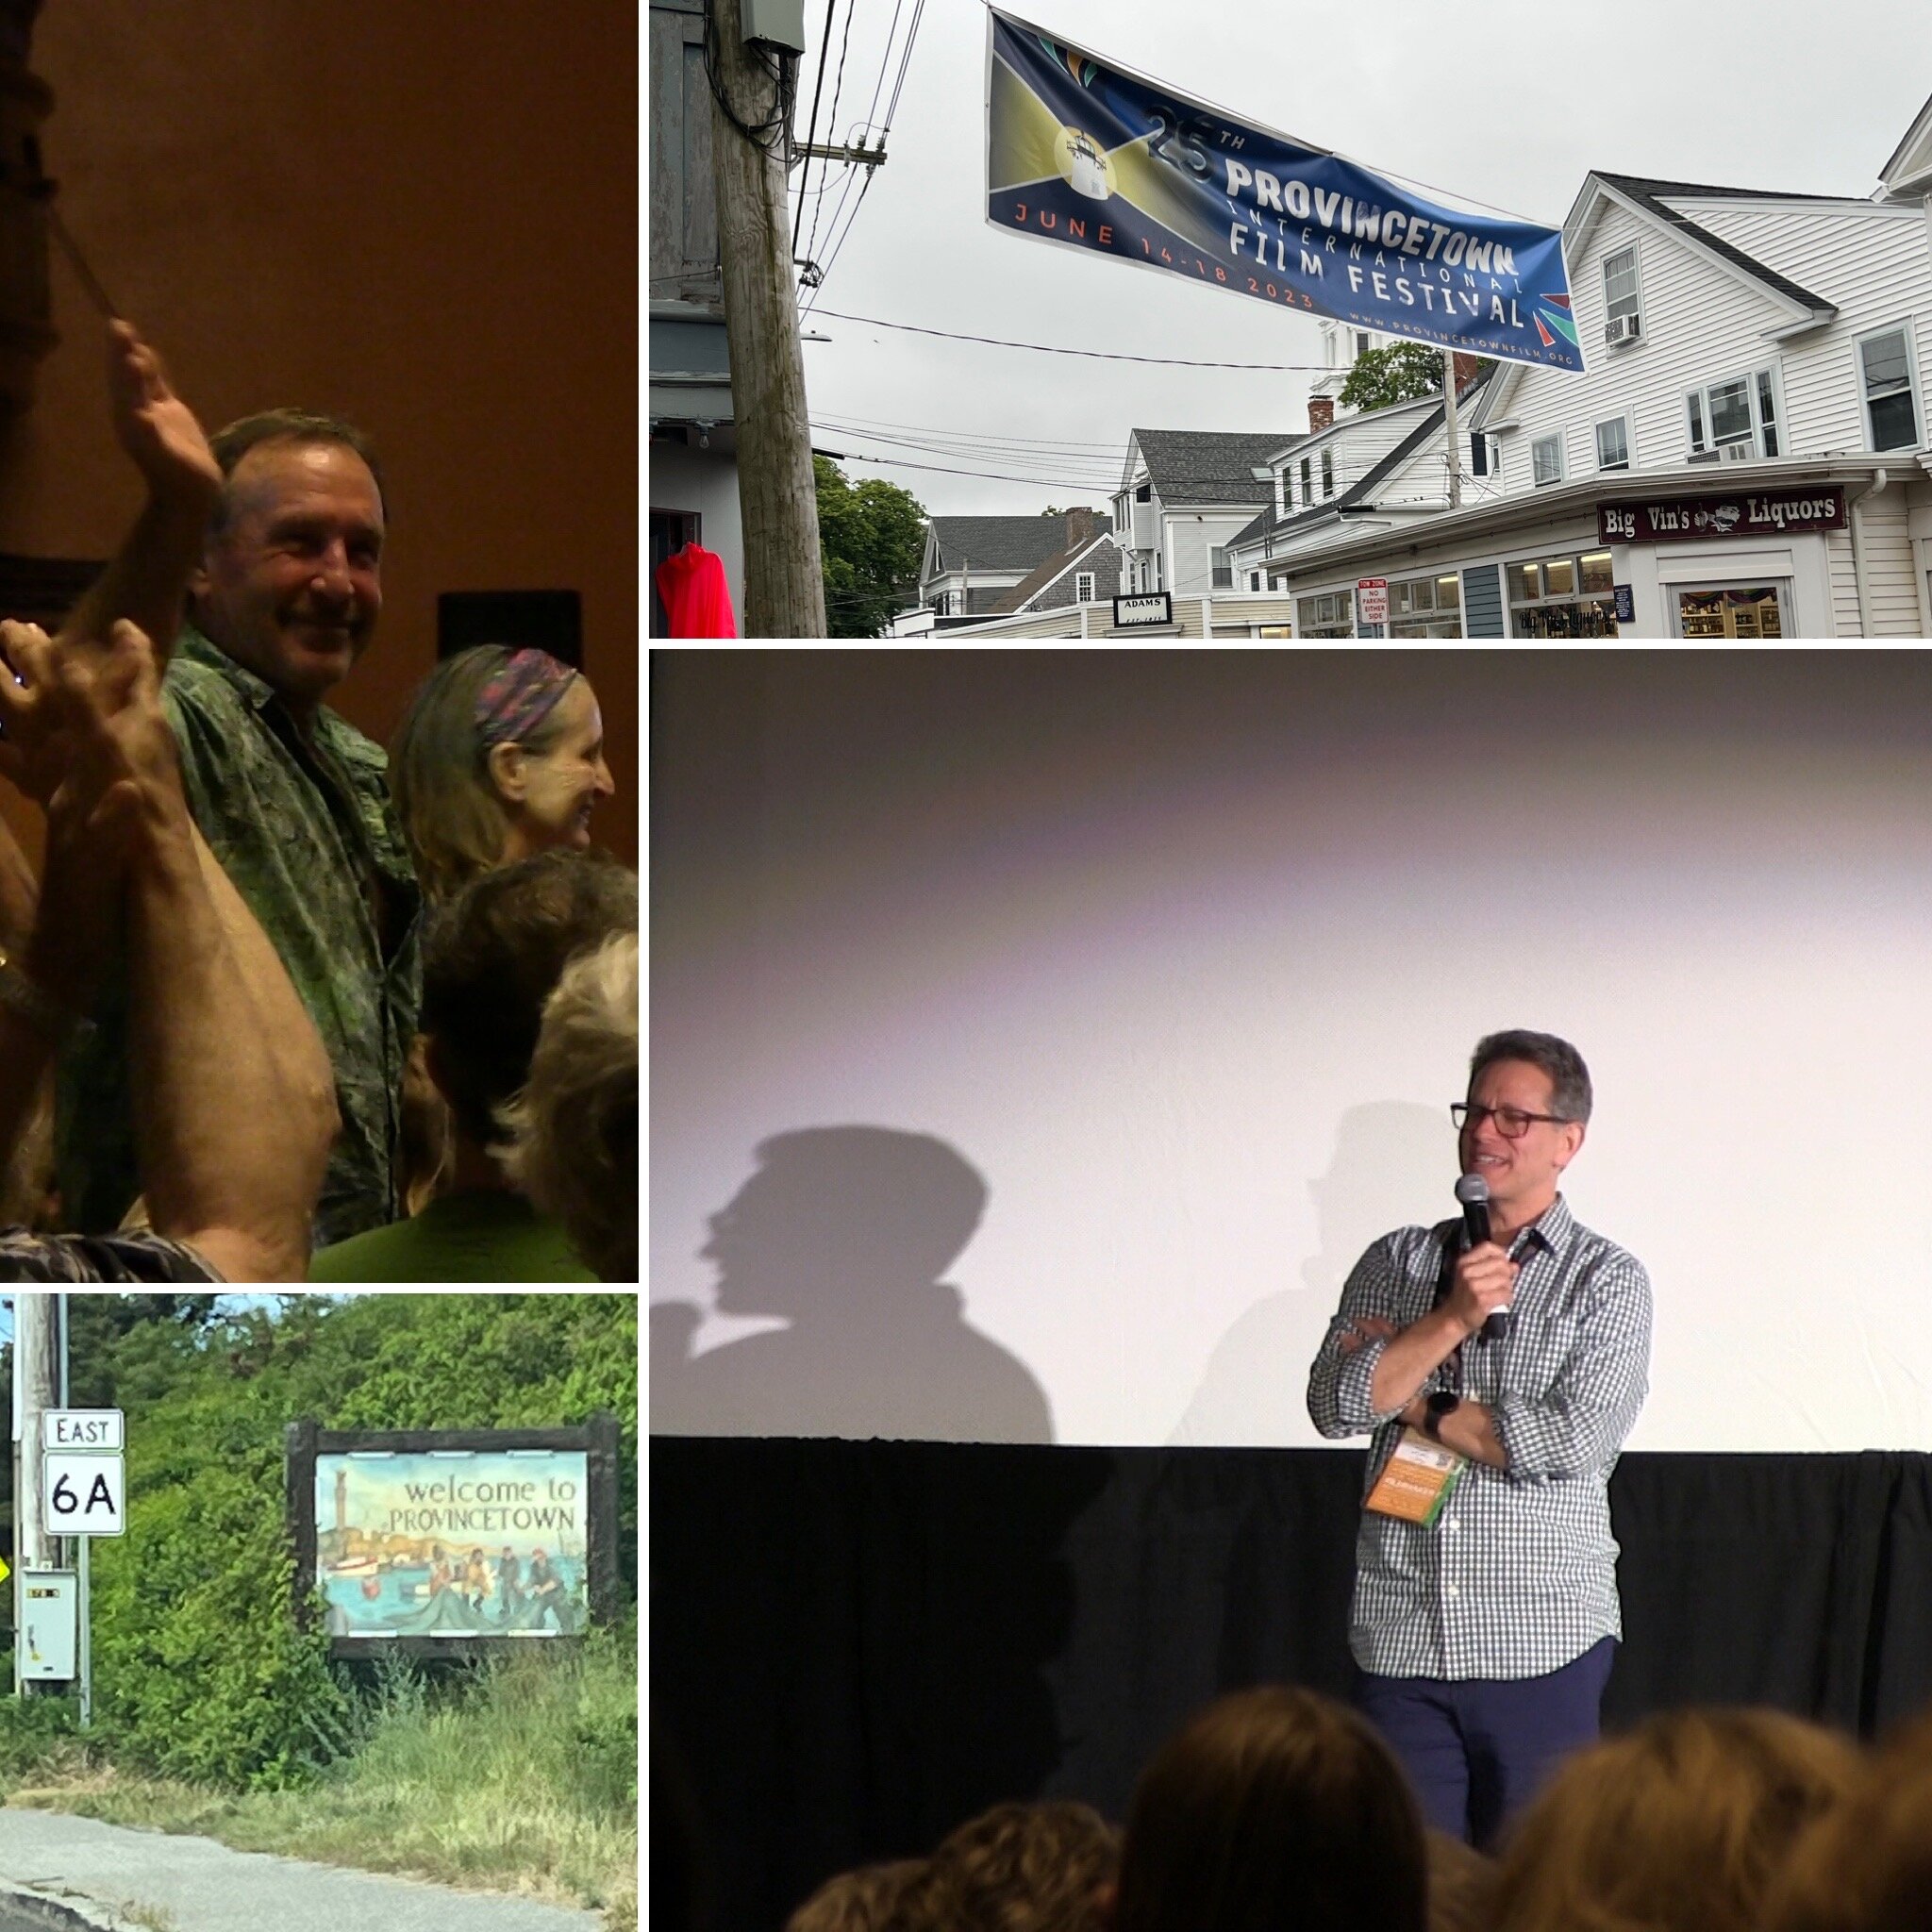 Director of the film In The Whale answered questions at the 25th anniversary of Provincetown International Film Festival. Fascinating local story crafted into an amazing documentary about Michael Packard!
.
Check out our Youtube channel in our bio fo